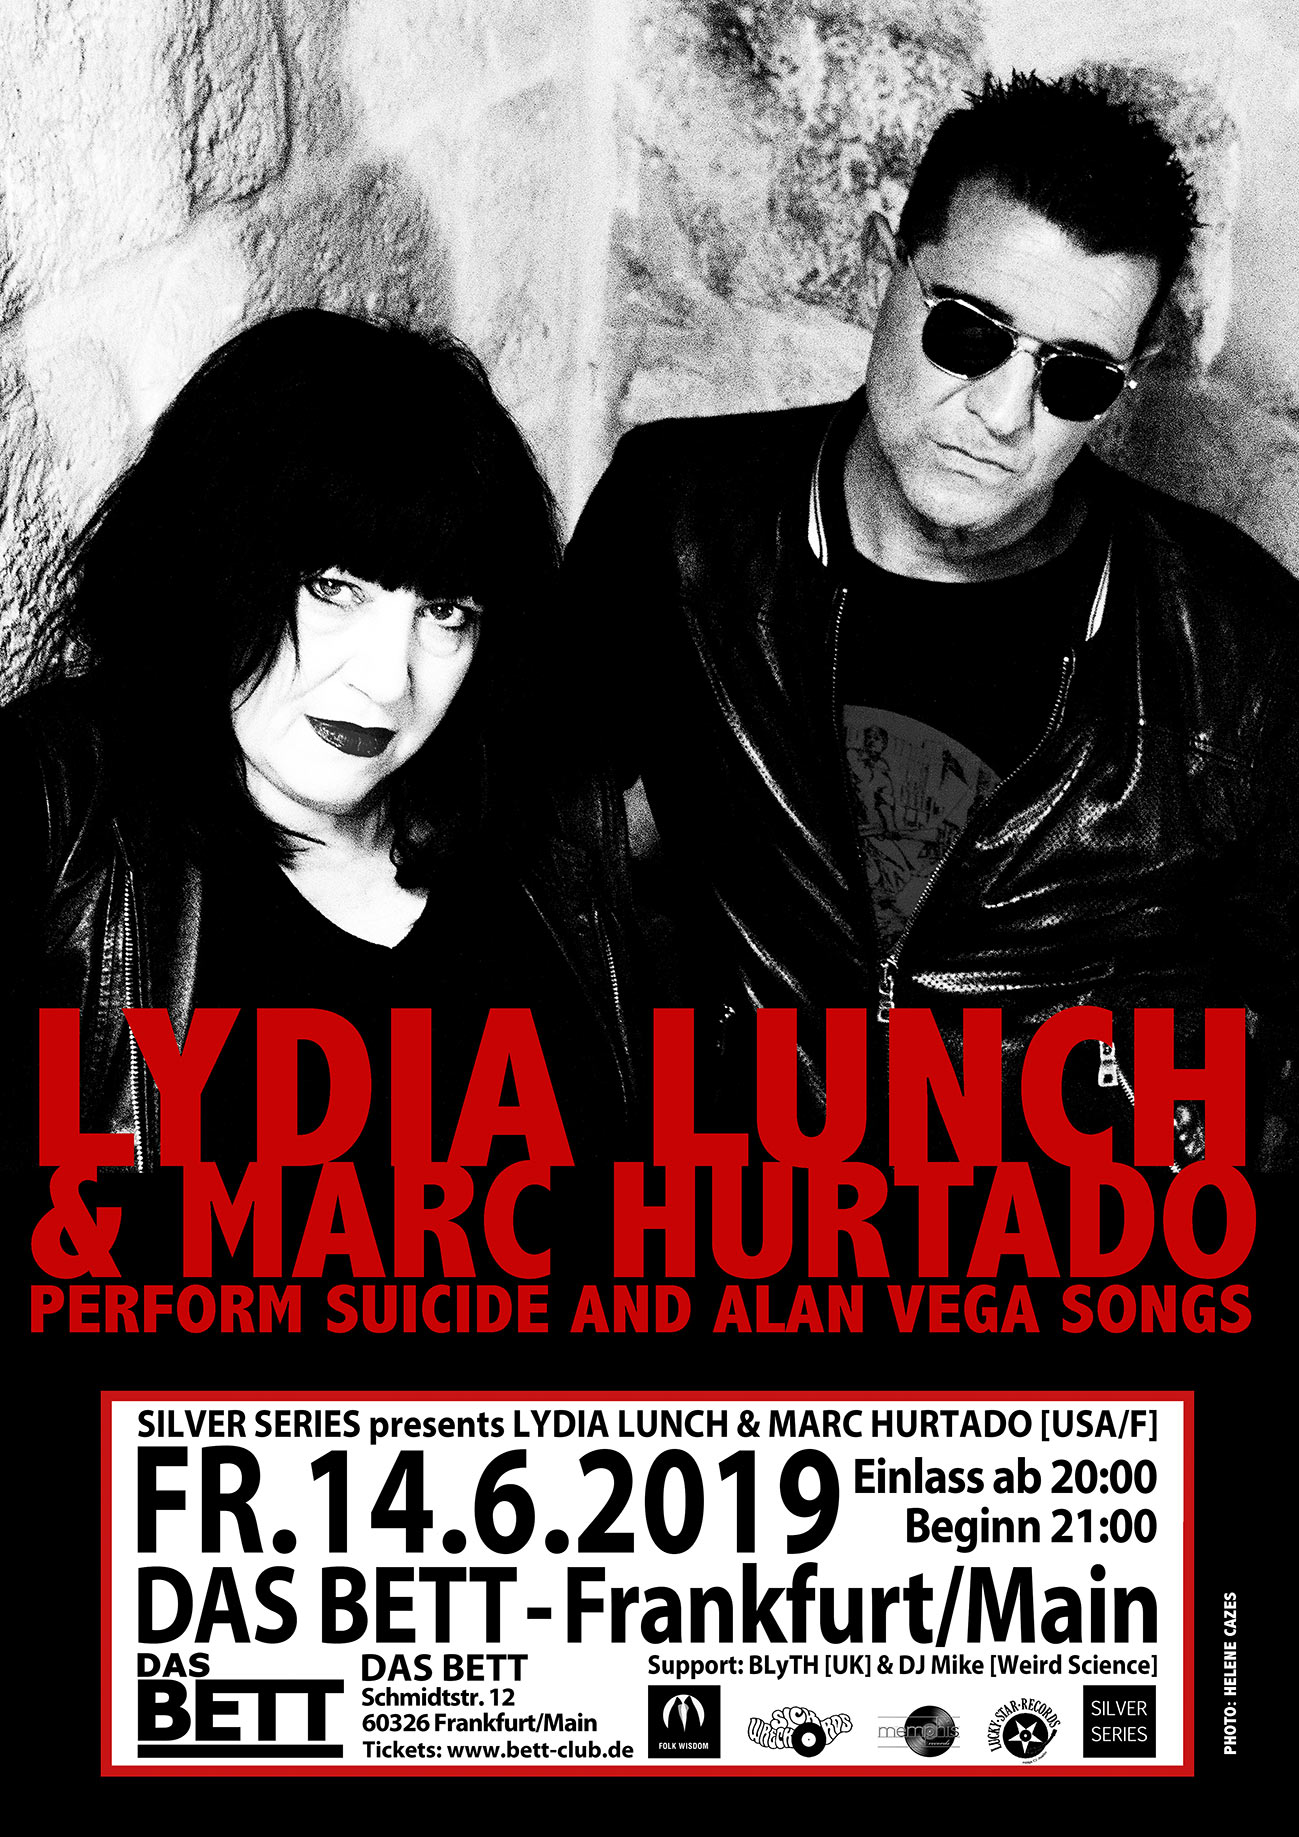 LYDIA LUNCH & MARC HURTADO PERFORM SUICIDE AND ALAN VEGA SONGS